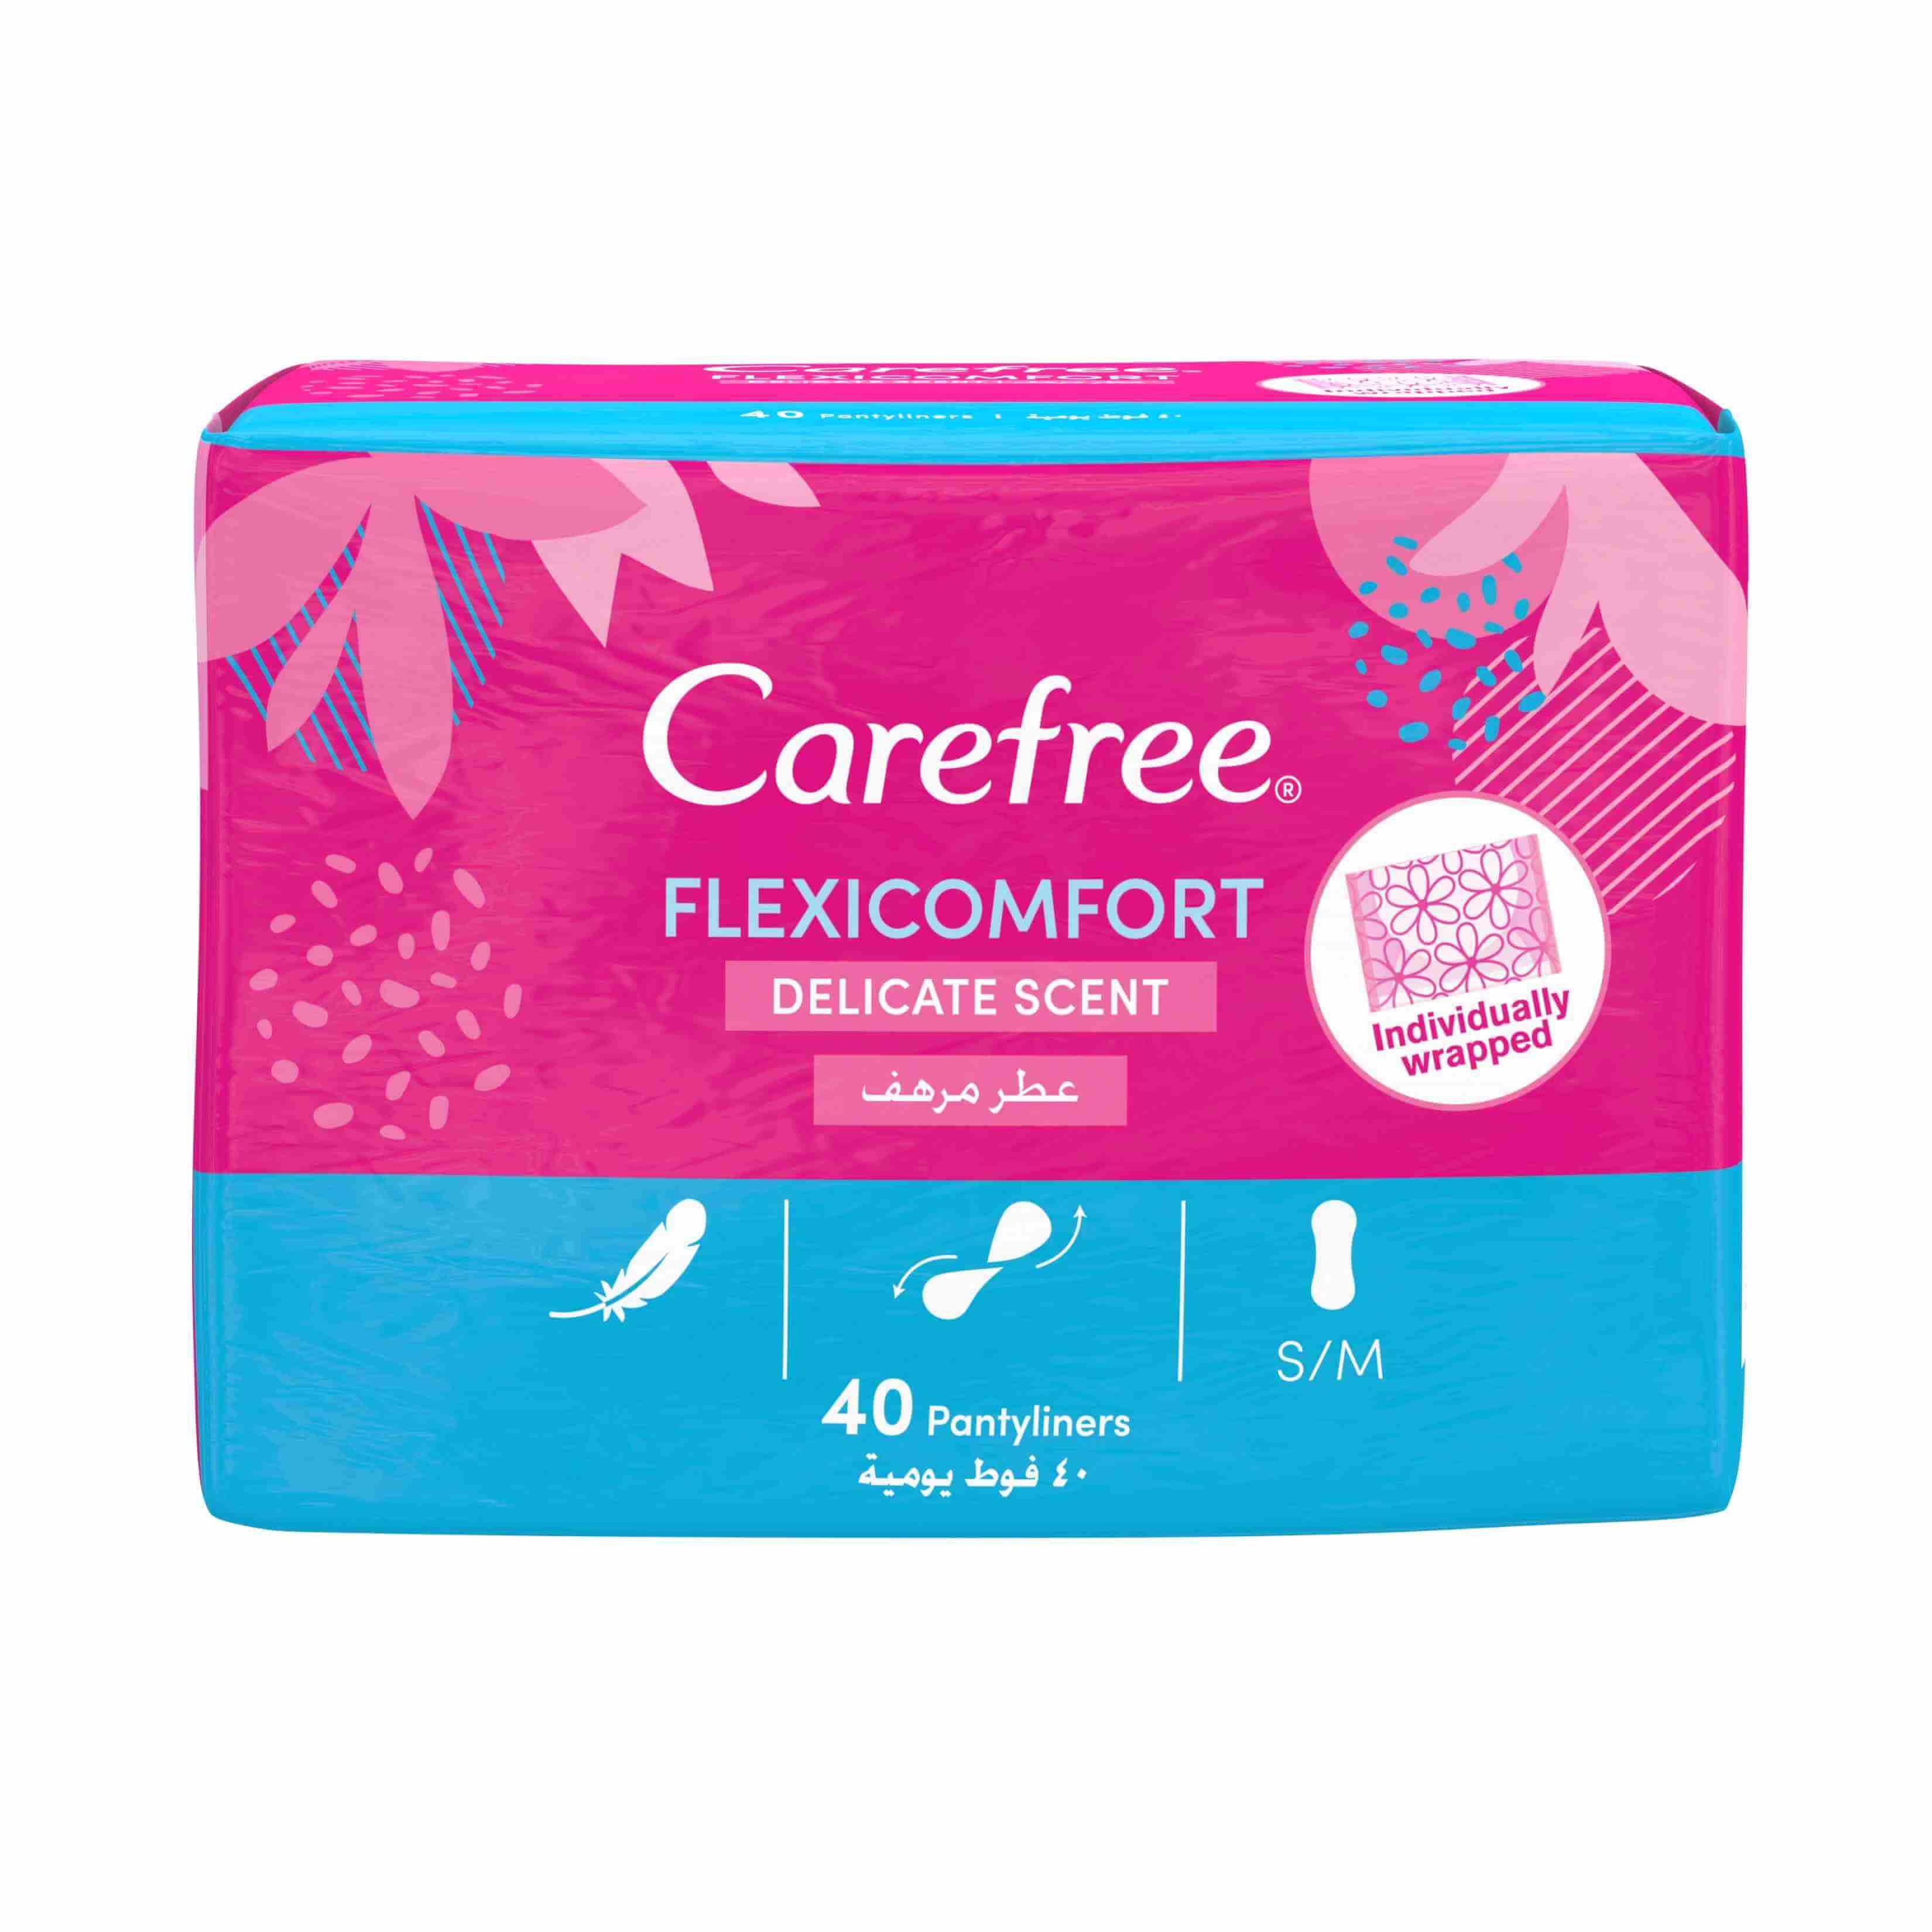 https://www.carefreearabia.com/sites/carefree_menap/files/product-images/carefree-flexicomfort-delicate-scent-40_0.jpg